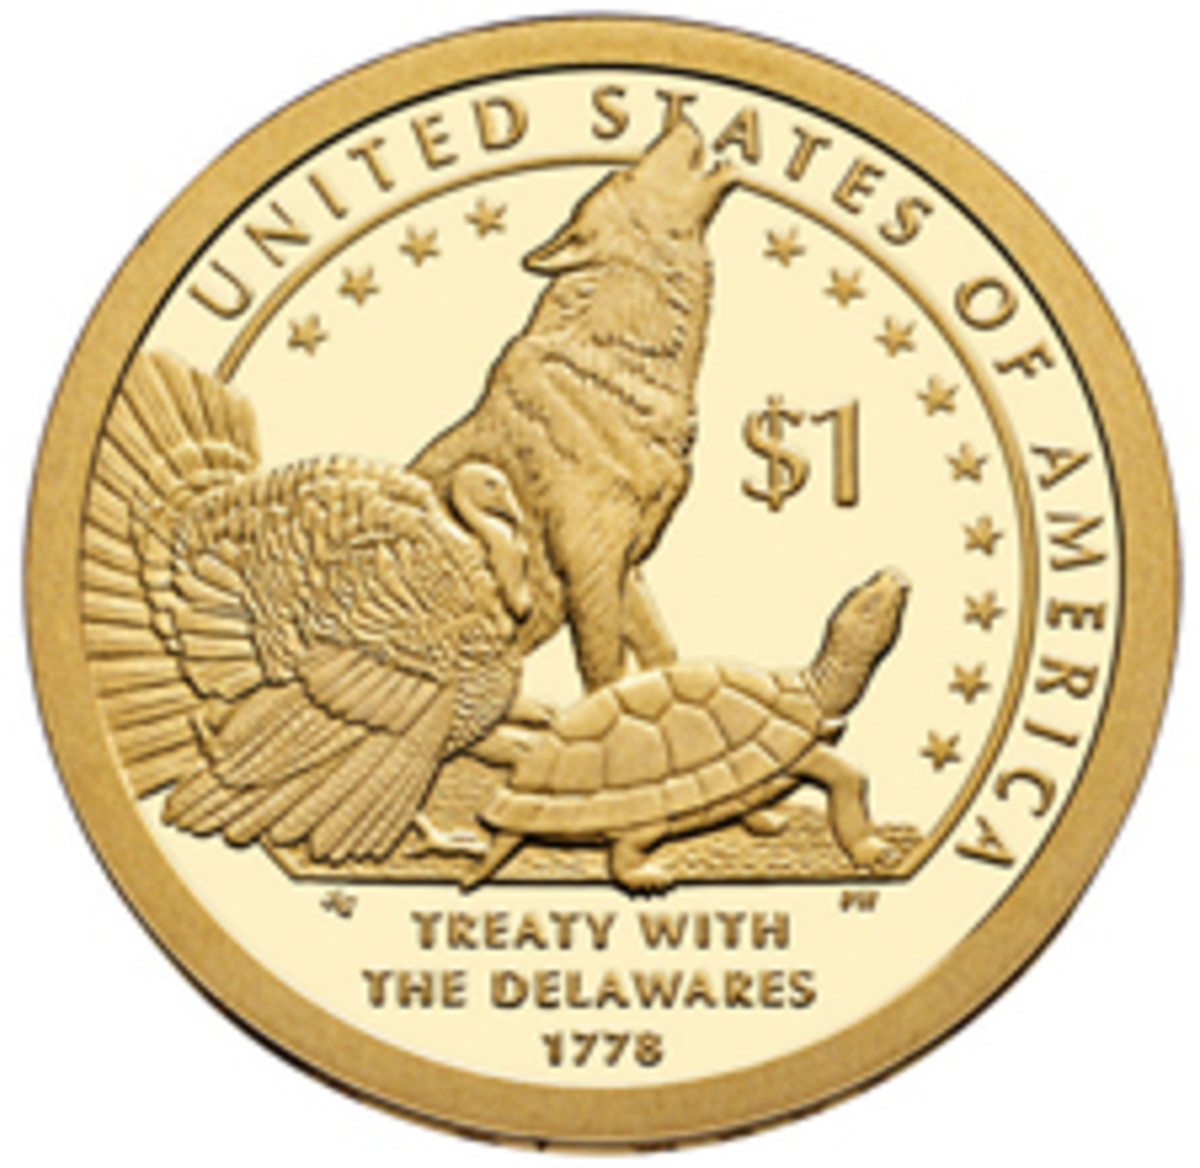  Reverse of the 2013 Native American dollar coin honoring the The Delaware Treaty (1778). New legislation preserves the series.(Image courtesy www.usacoinbook.com)